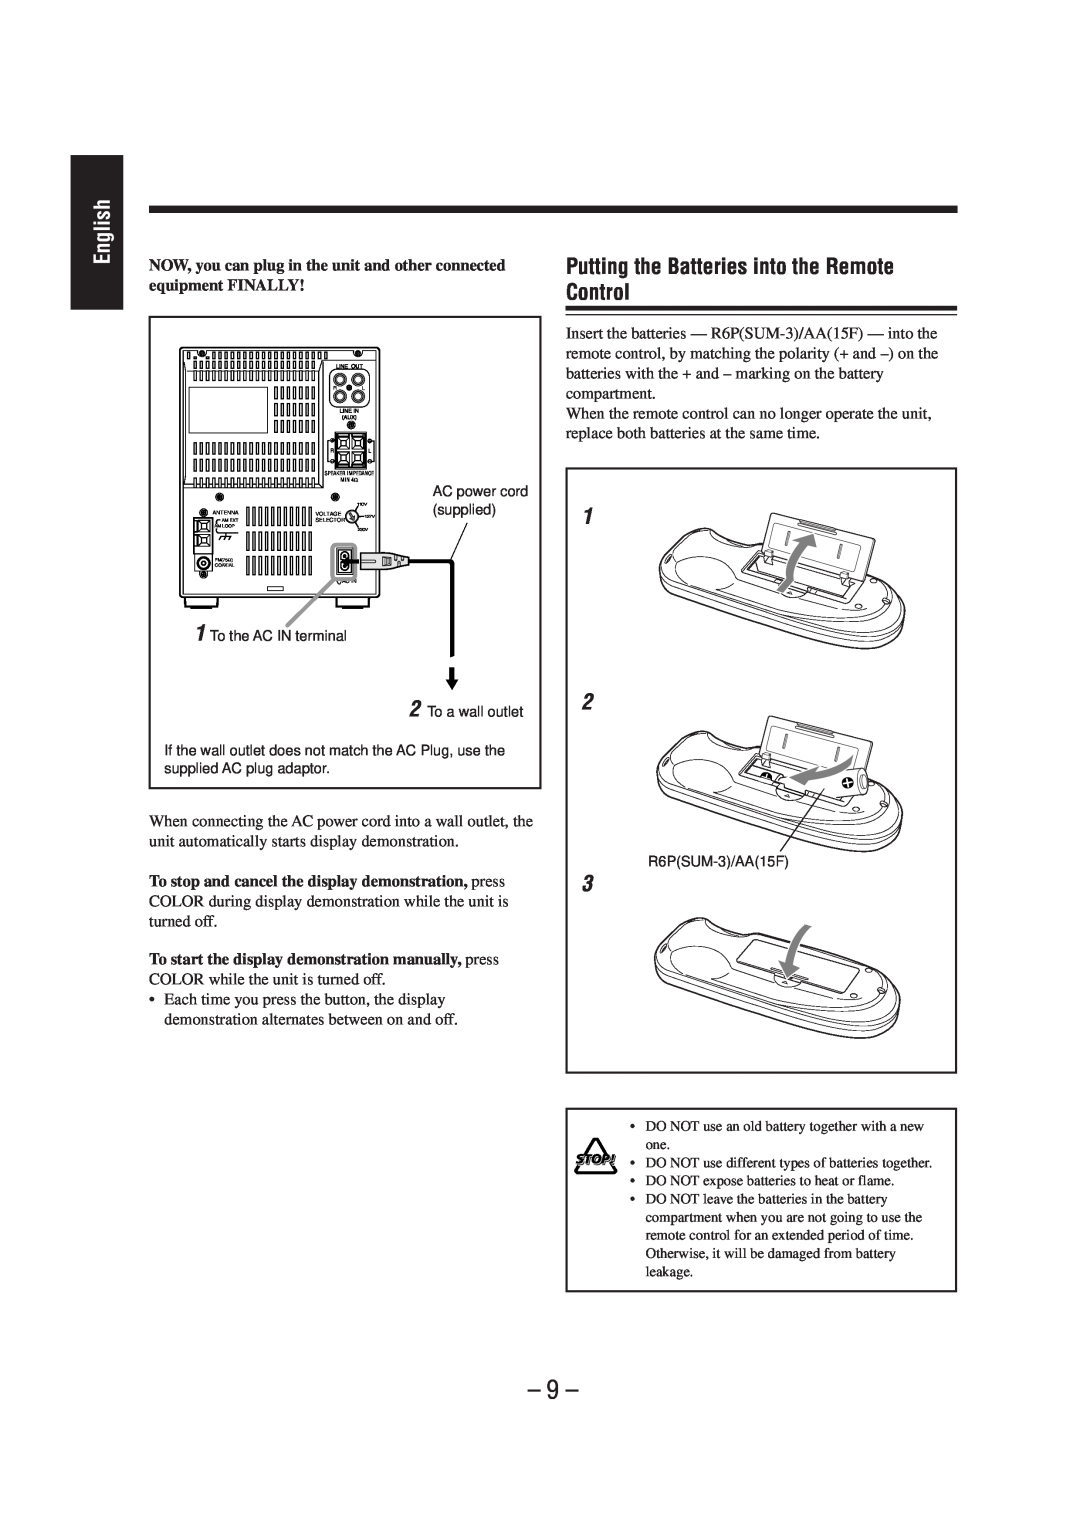 JVC UX-A70MD manual Putting the Batteries into the Remote Control, English 